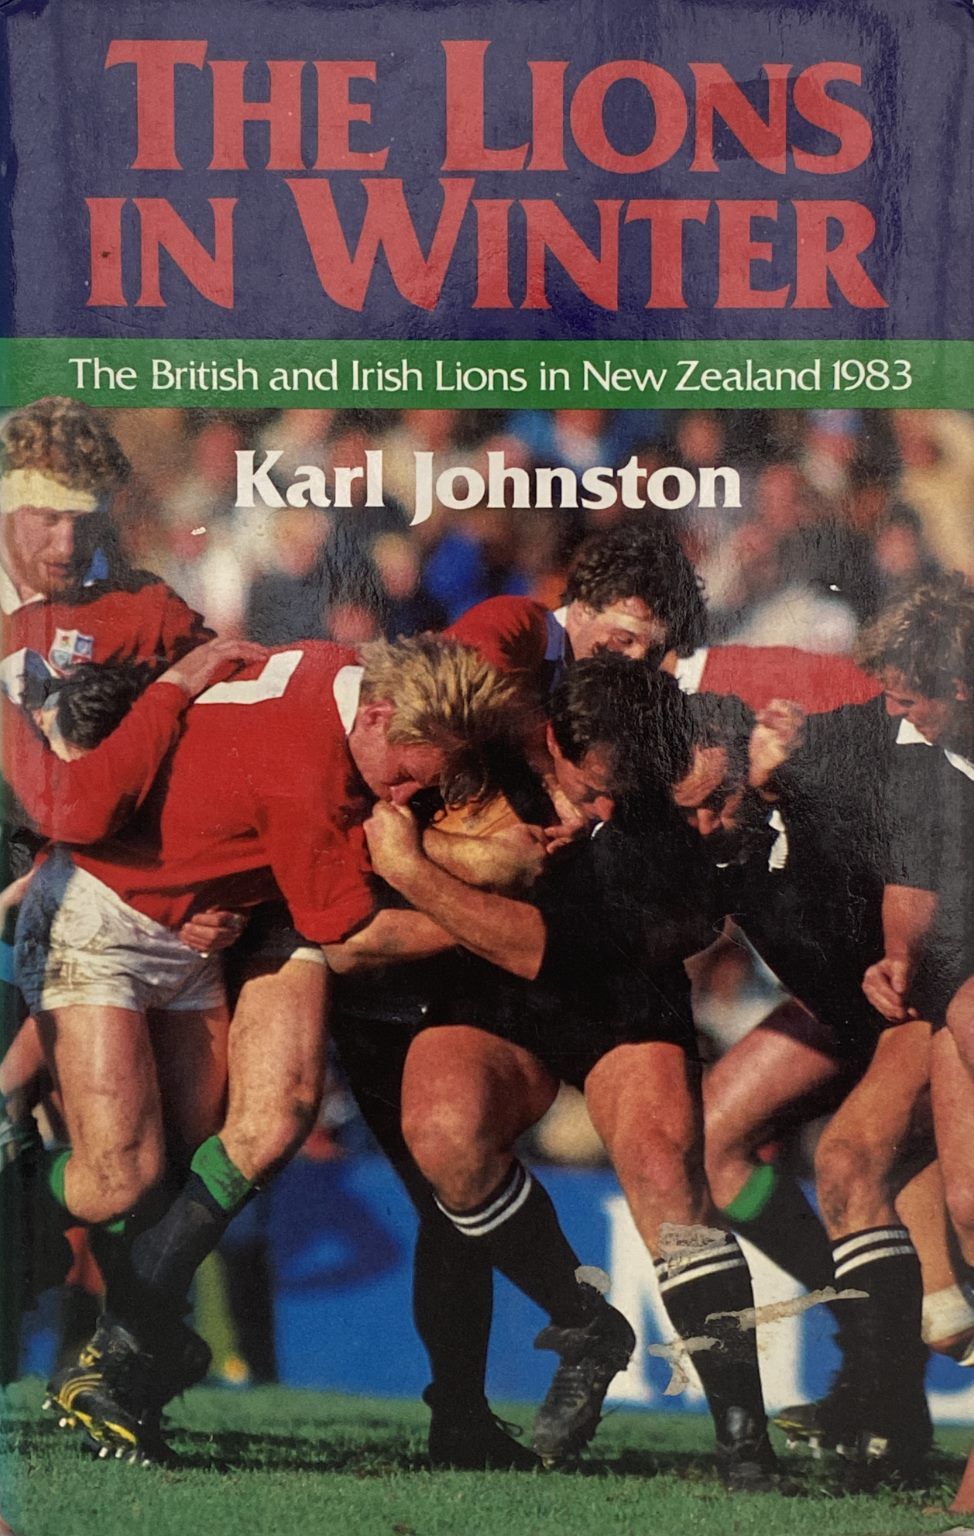 THE LIONS IN WINTER: The British and Irish Lions in New Zealand 1983